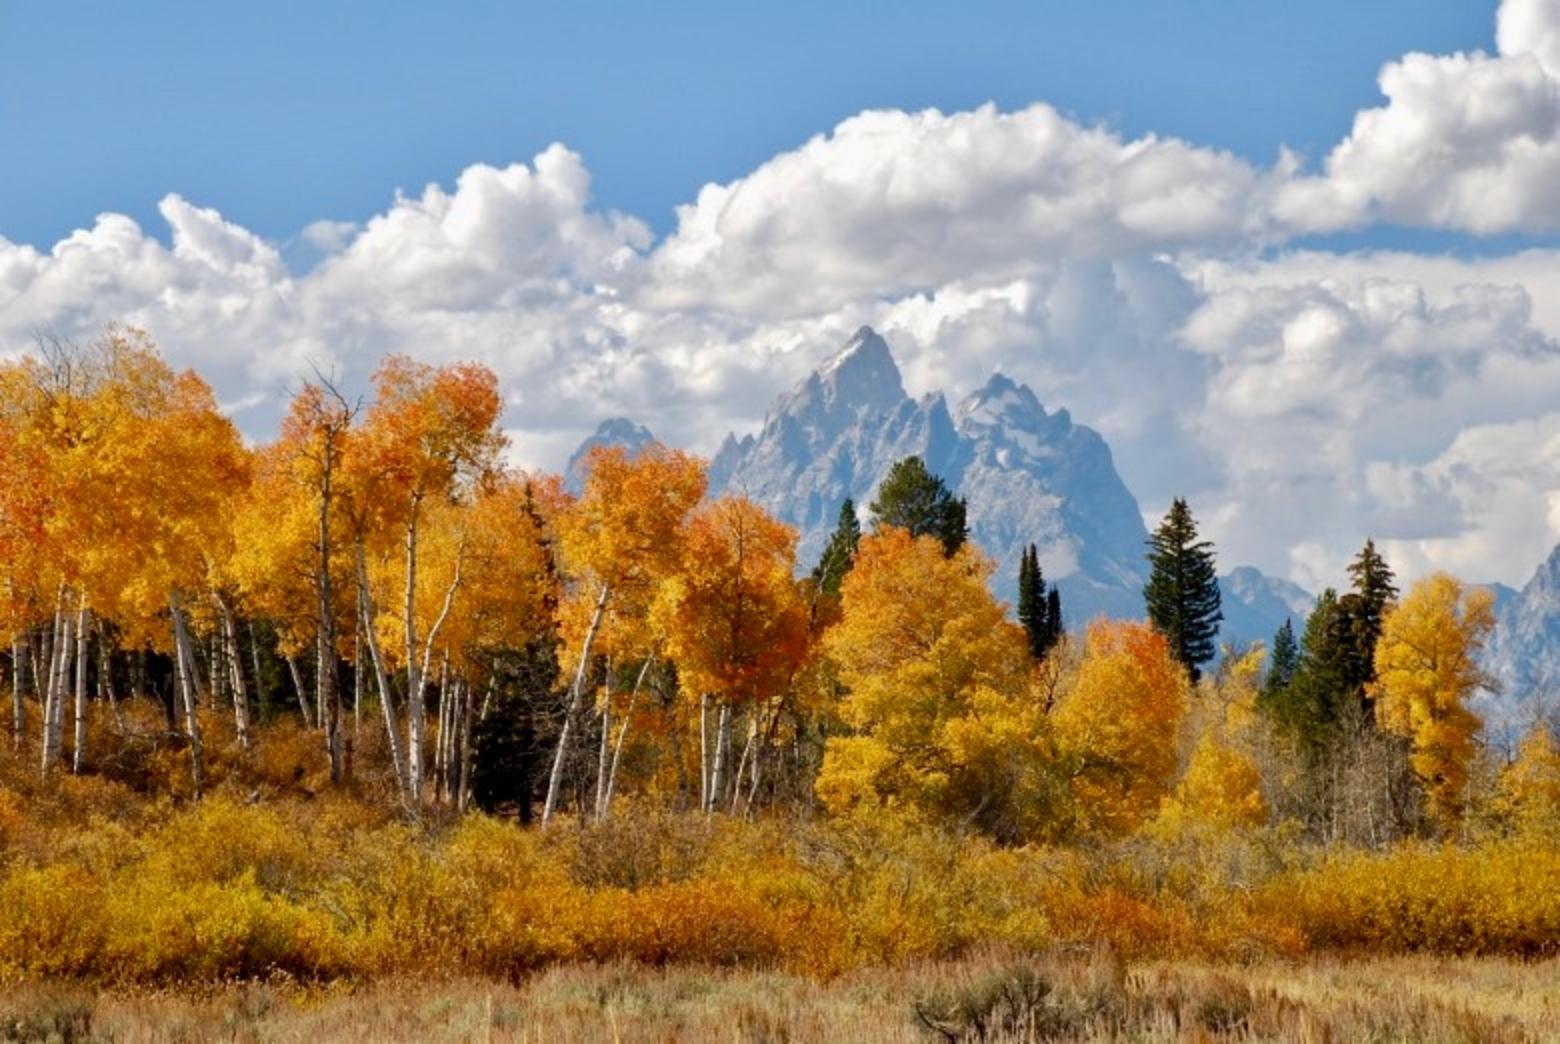 The Tetons leave us spellbound in any season but in autumn the view grips us like no other.  Susan Marsh took this photo near the intersection of Grand Teton National Park and the Bridger-Teton National Forest. What moods does the image evoke in you? Photo courtesy Susan Marsh